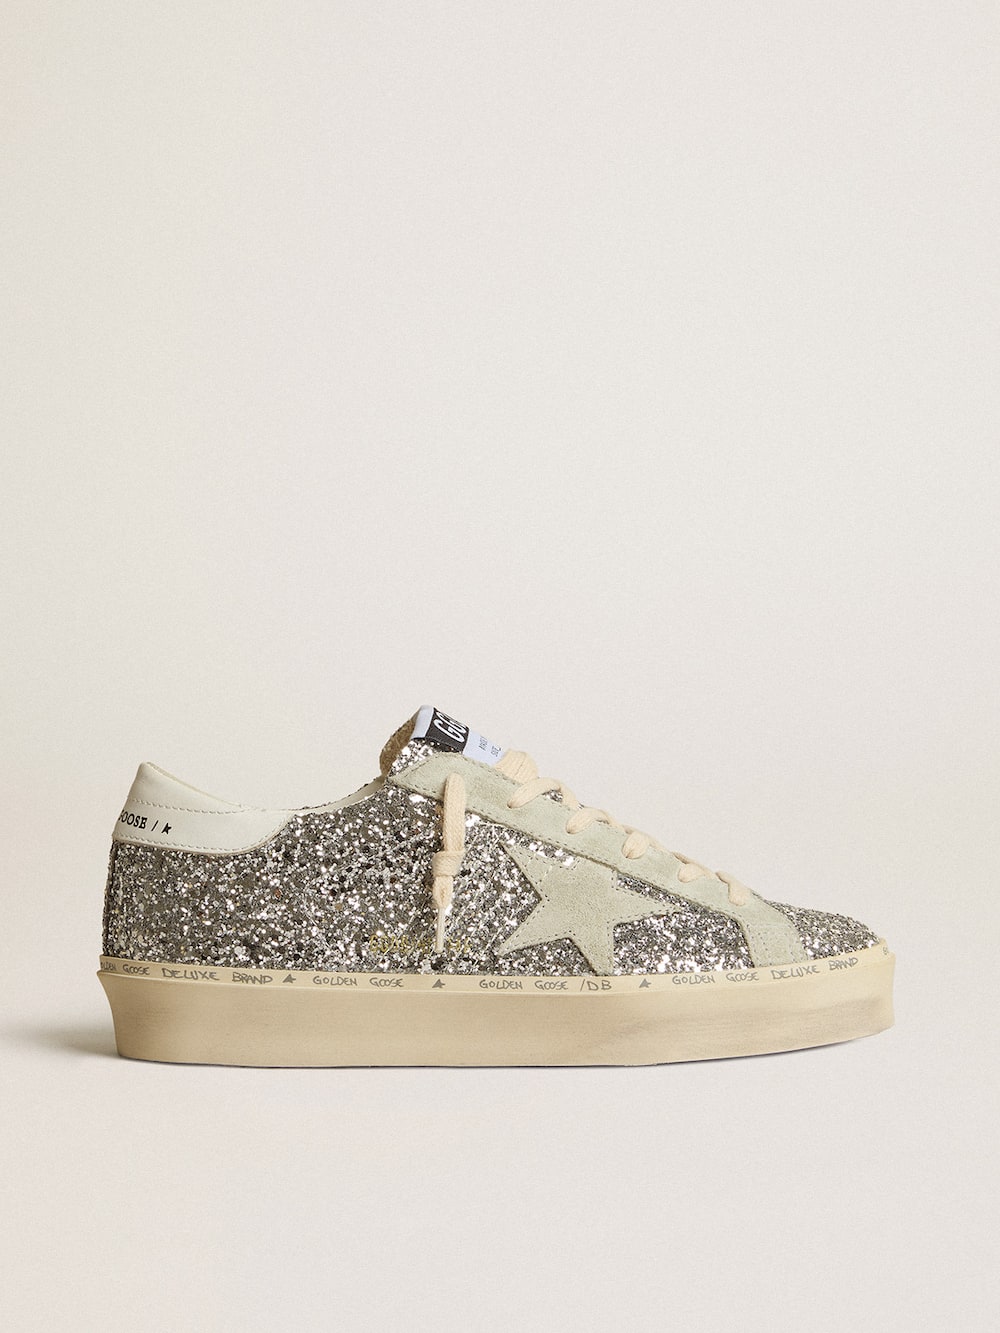 Golden Goose - Women's Hi Star in silver glitter with suede star and white heel tab in 